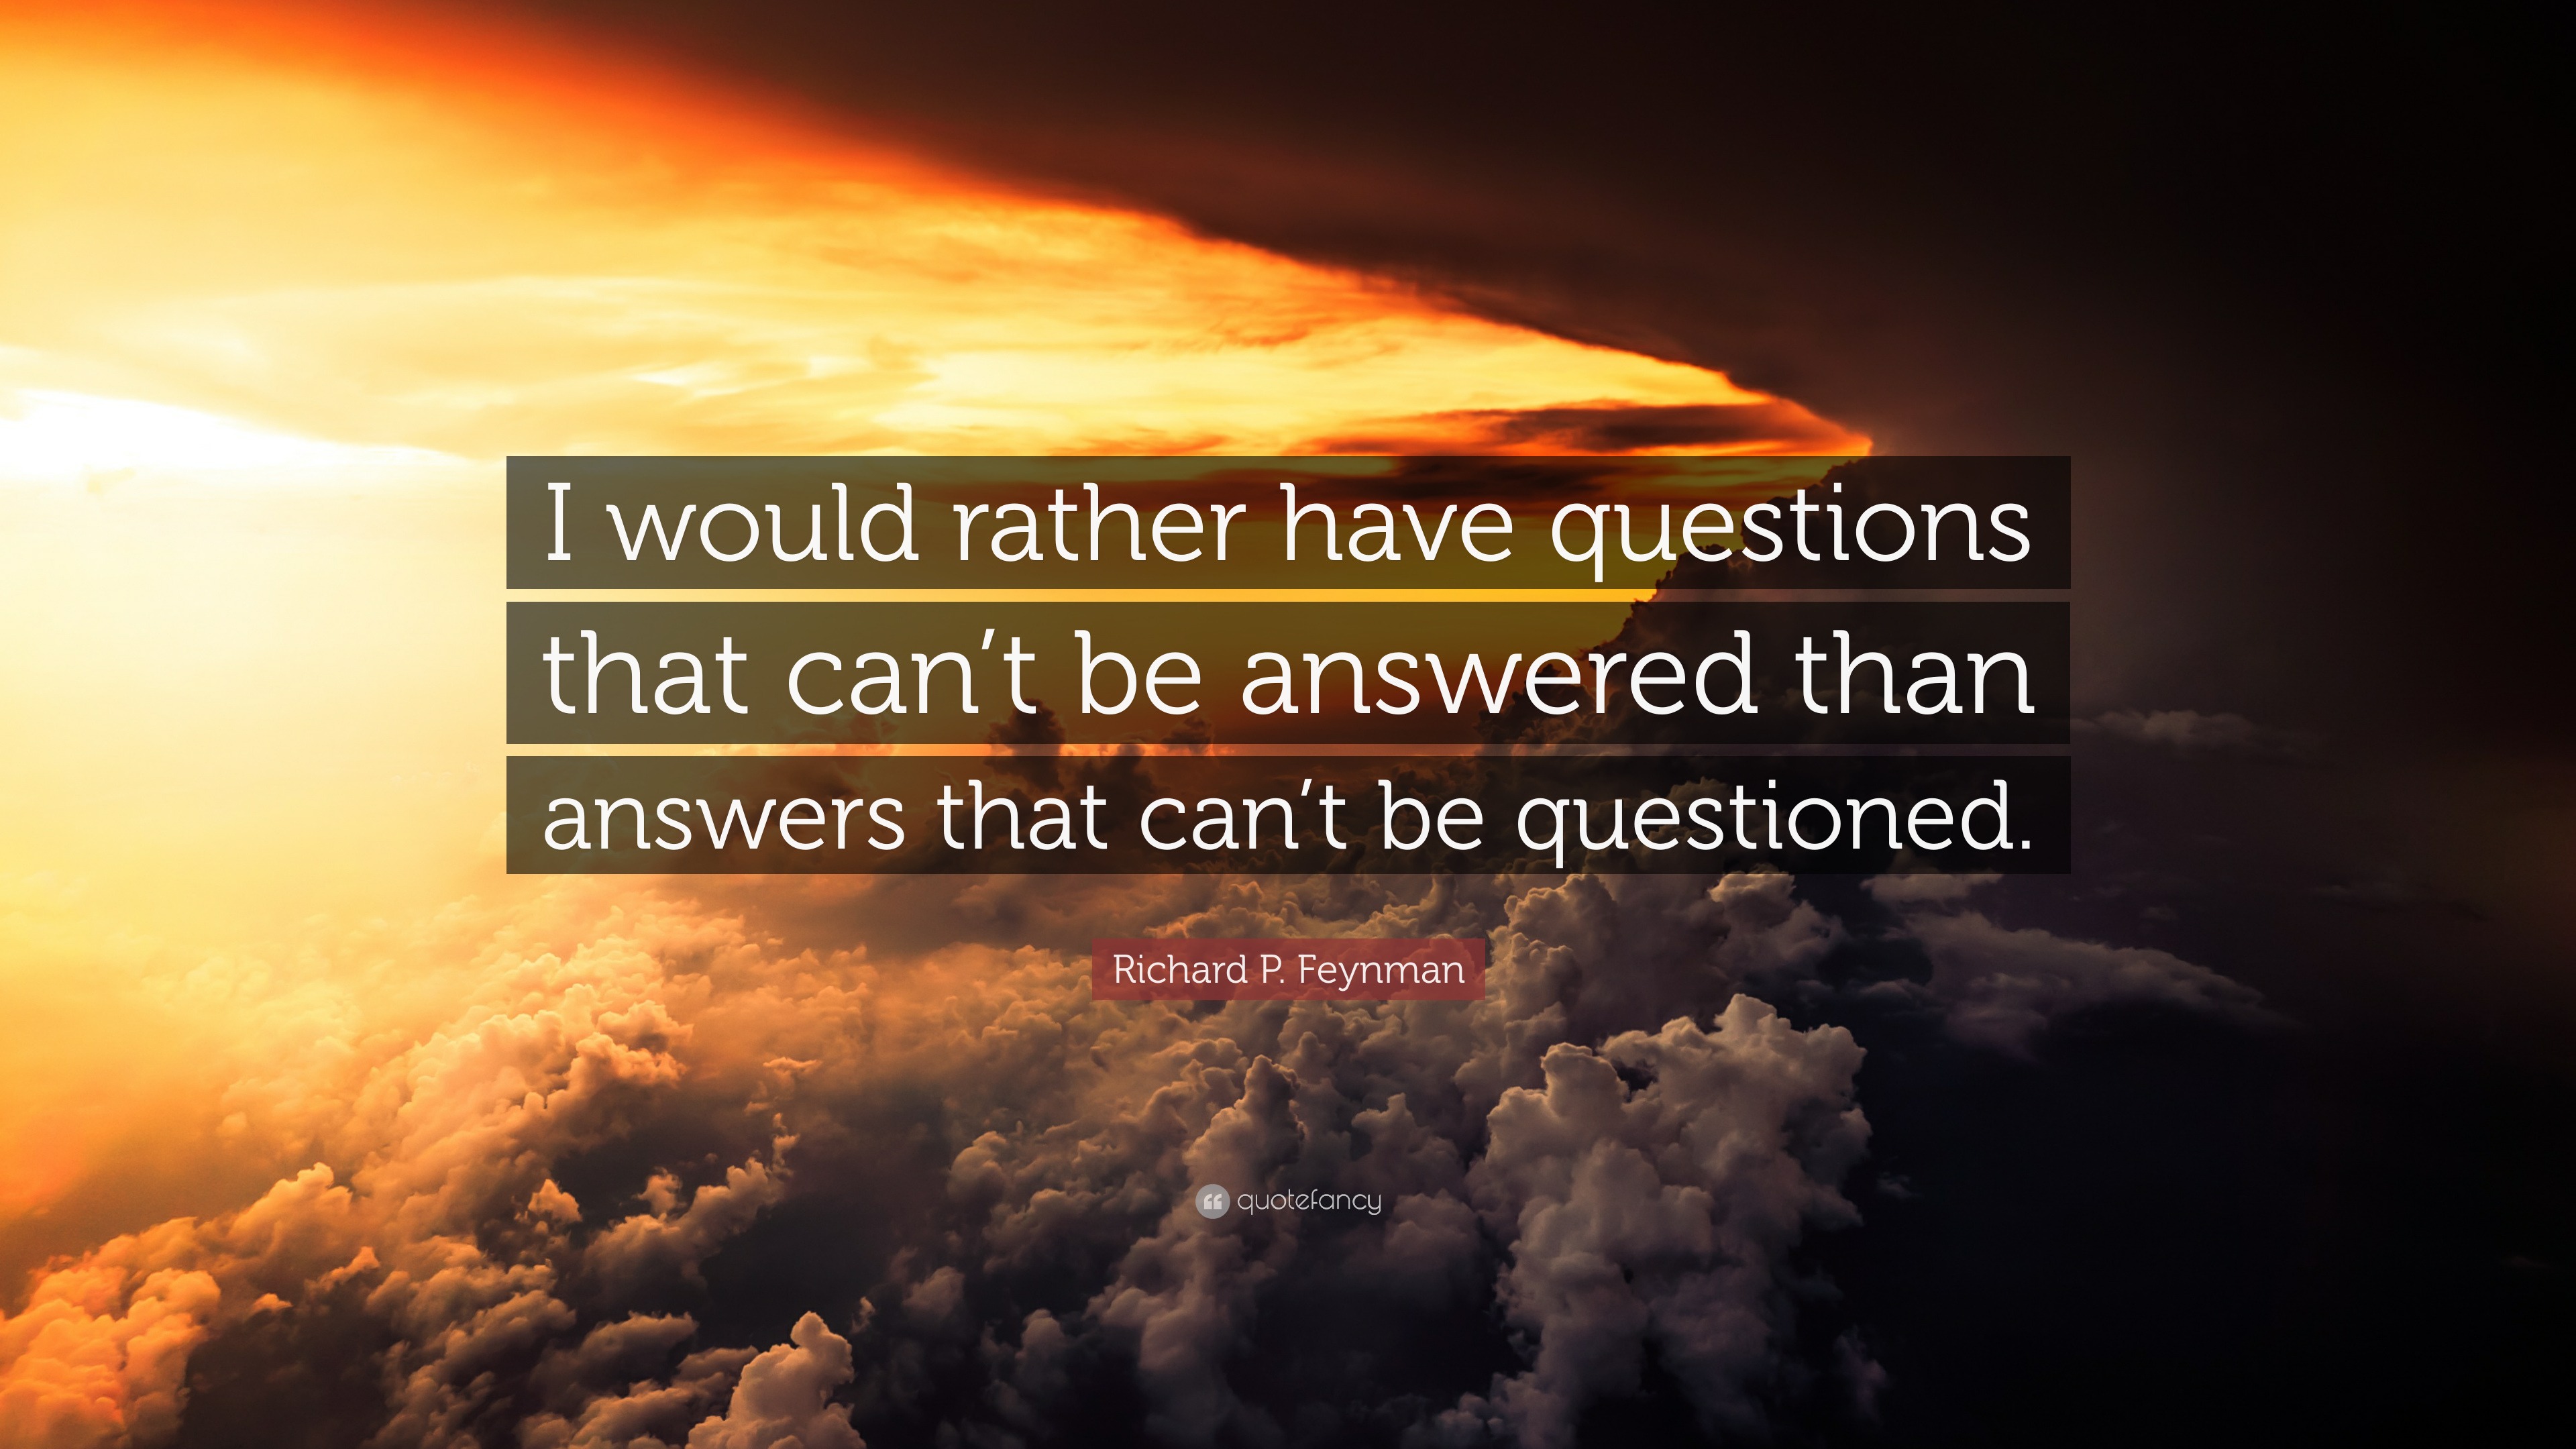 Richard P. Feynman Quote: “I would rather have questions that can’t be